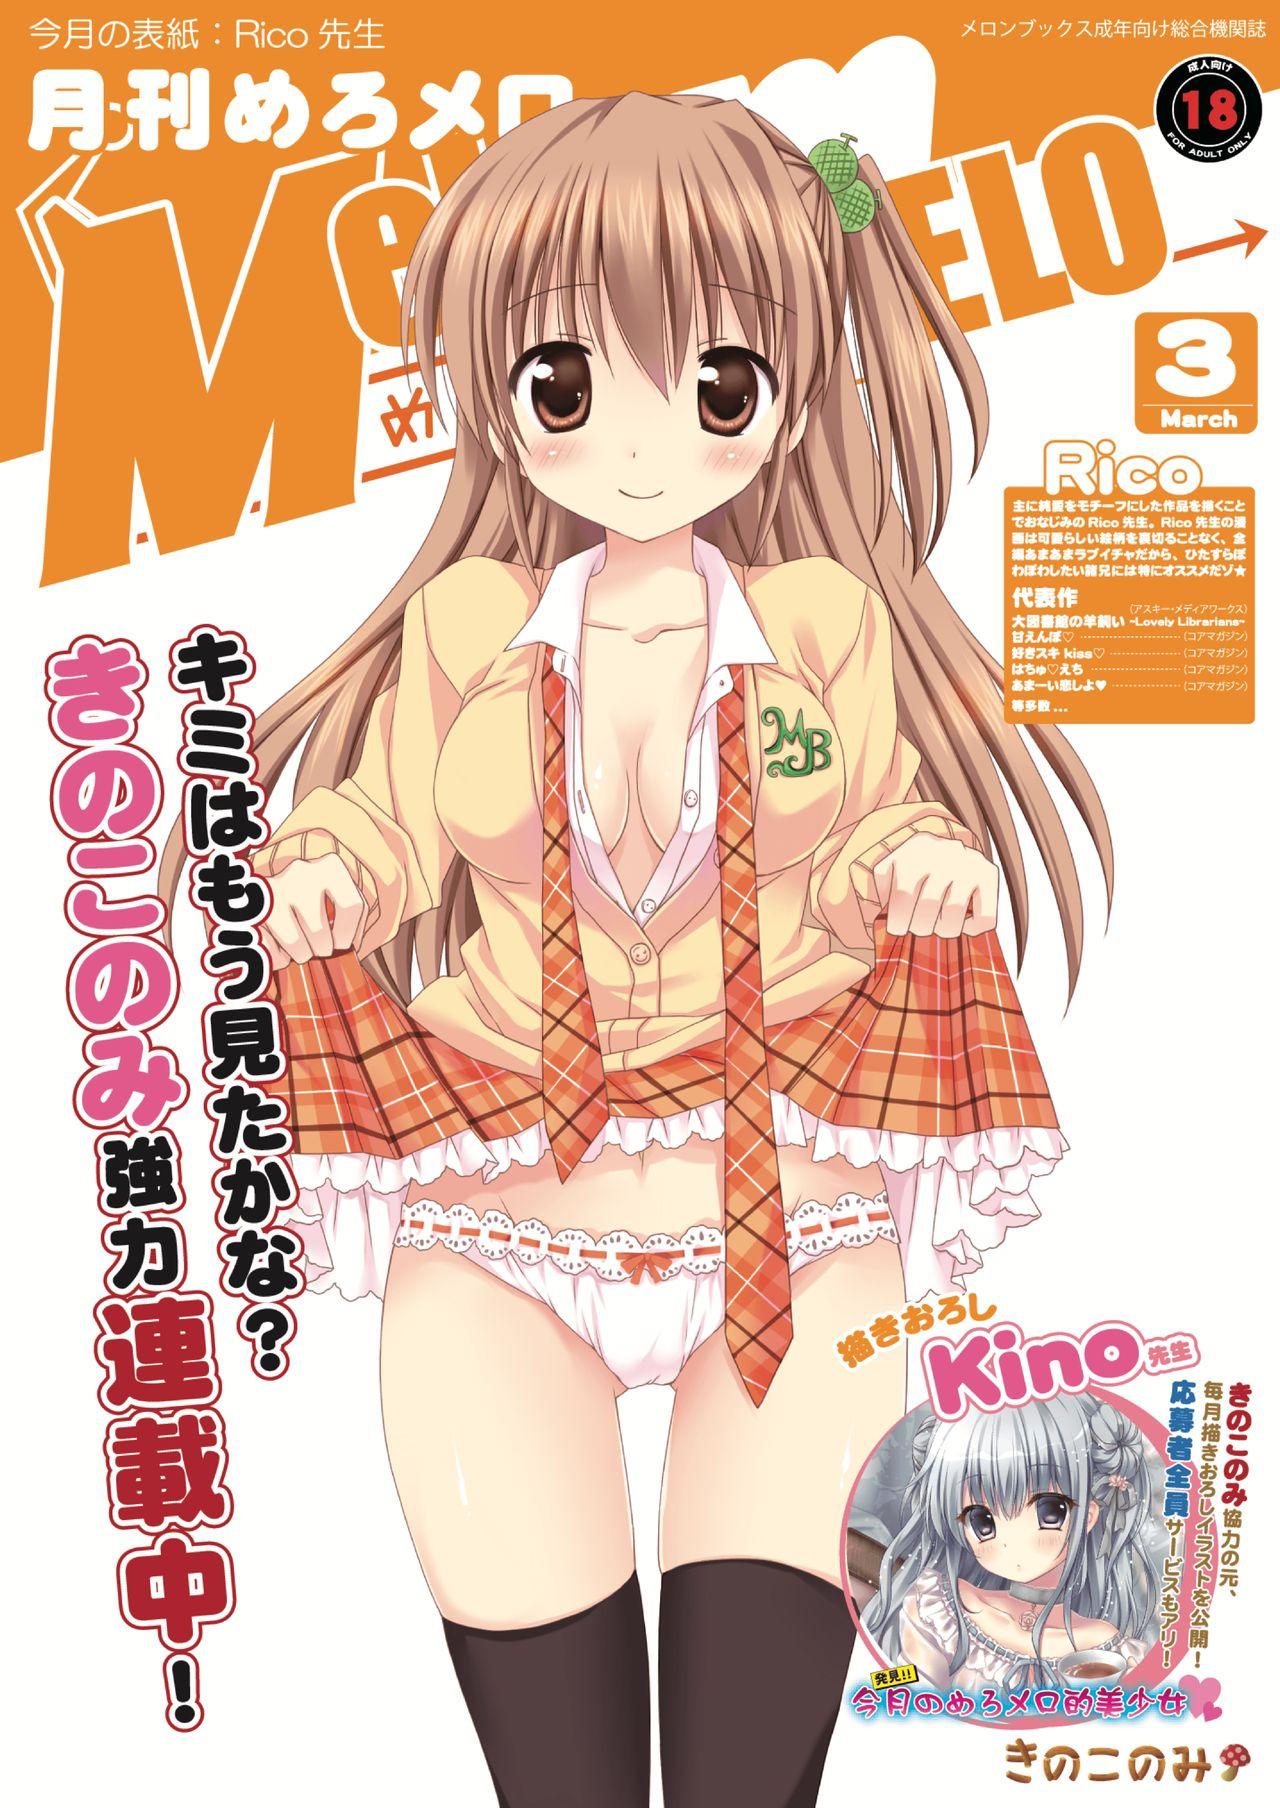 Monthly MelomELO Mar.2014 0